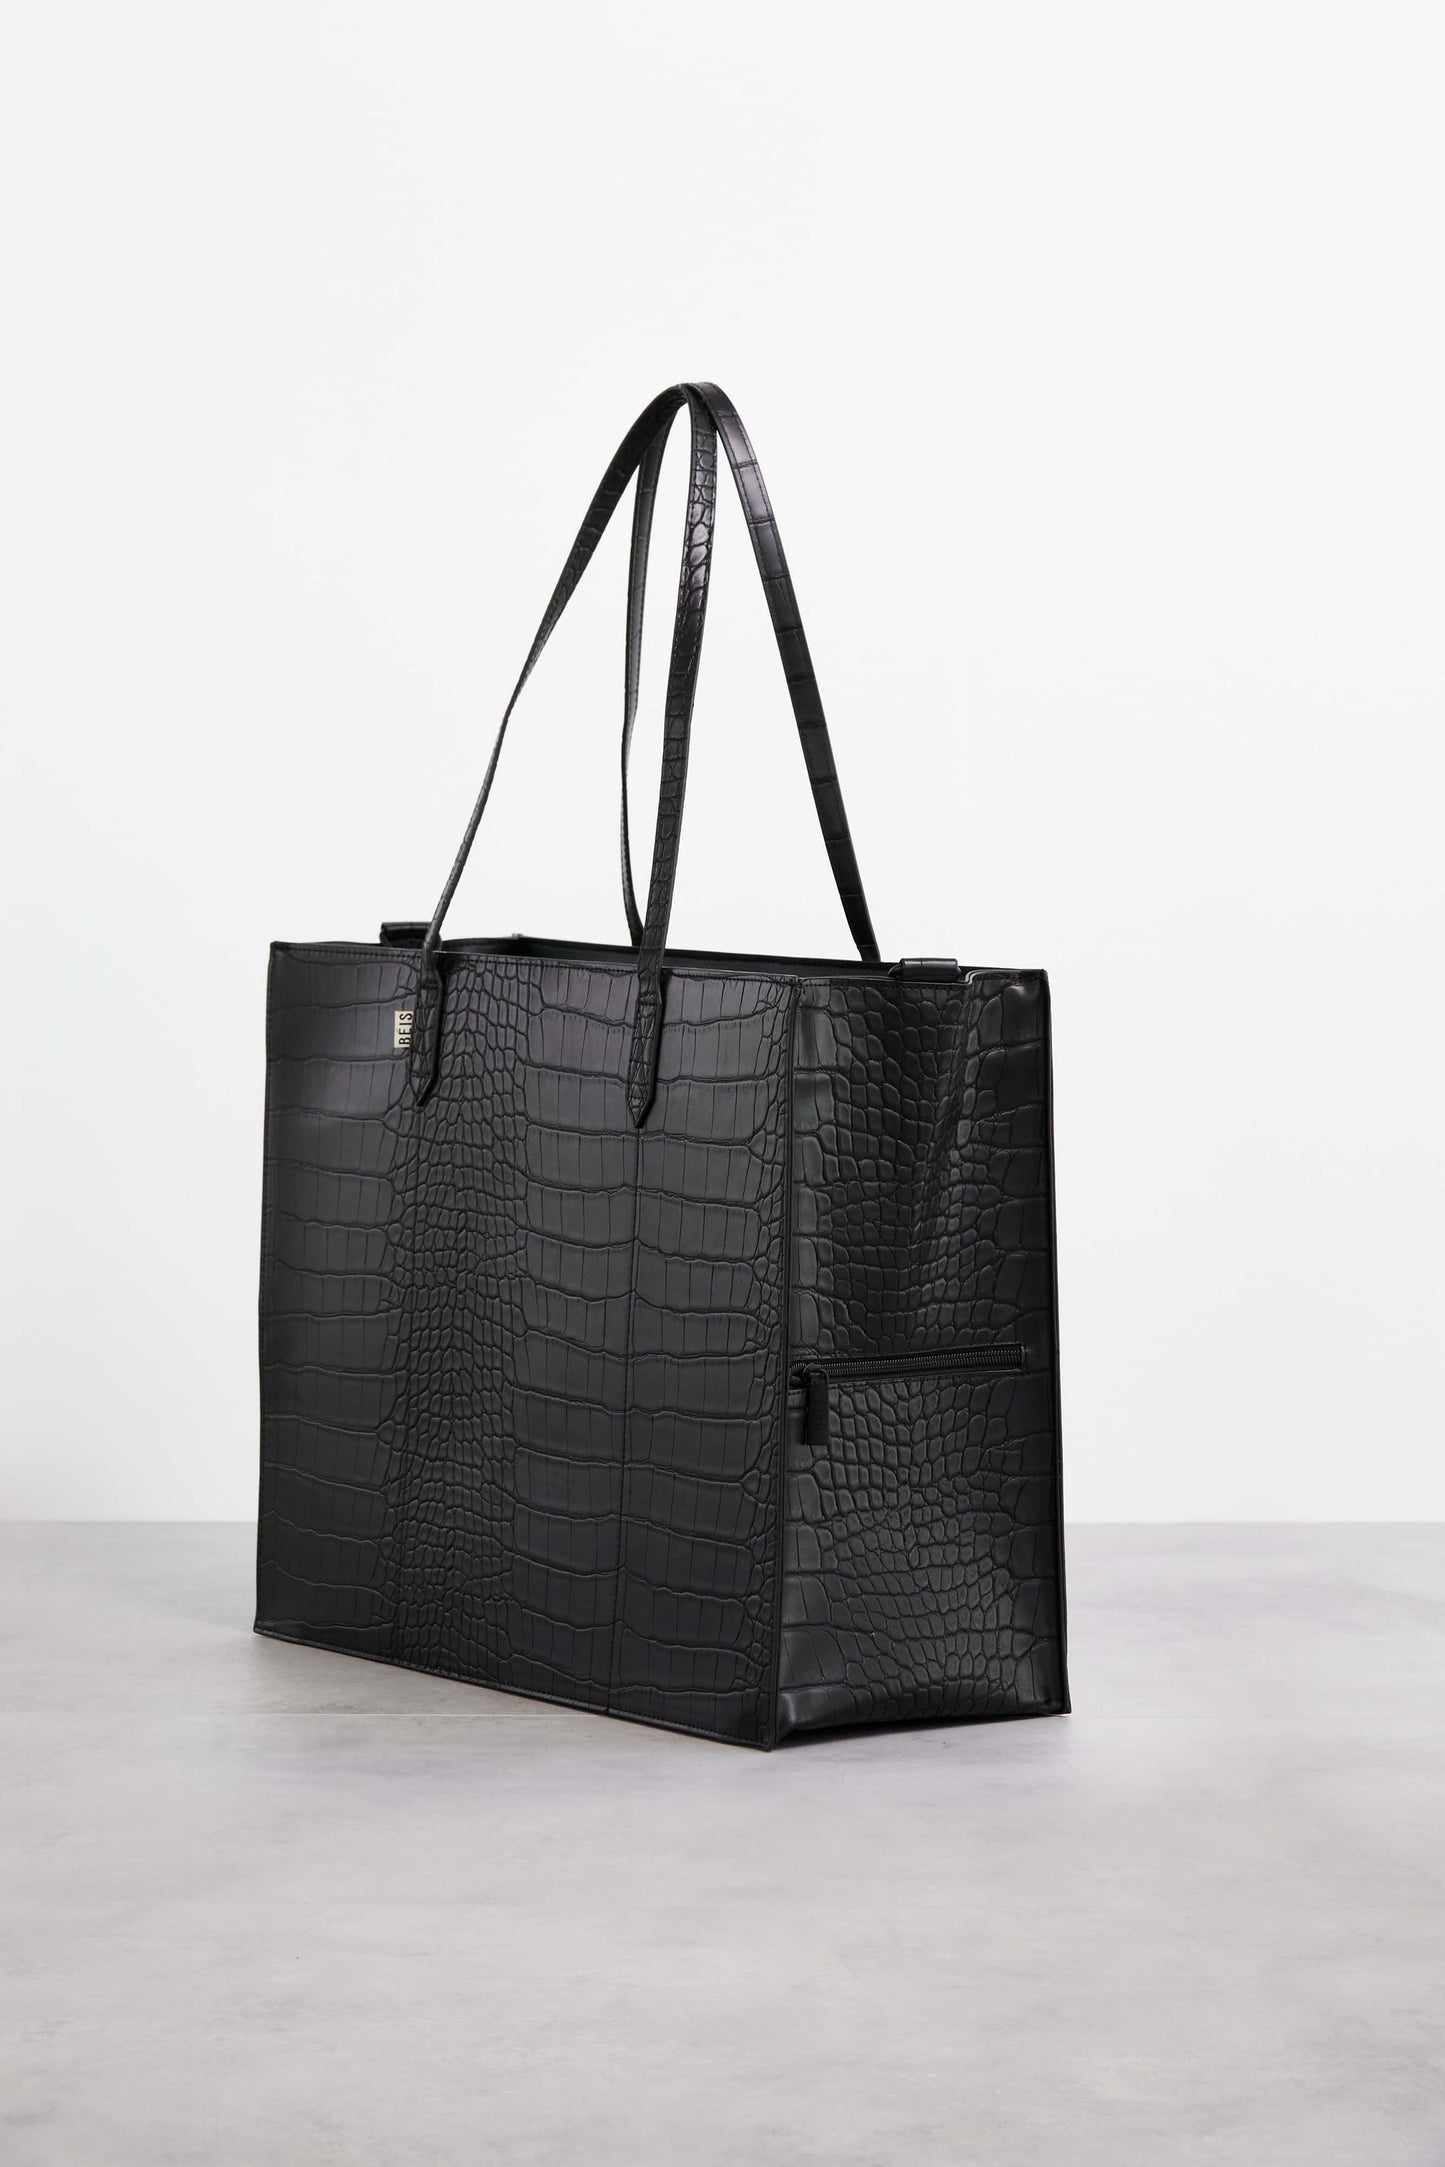 Work Tote Black Croc Front and Side